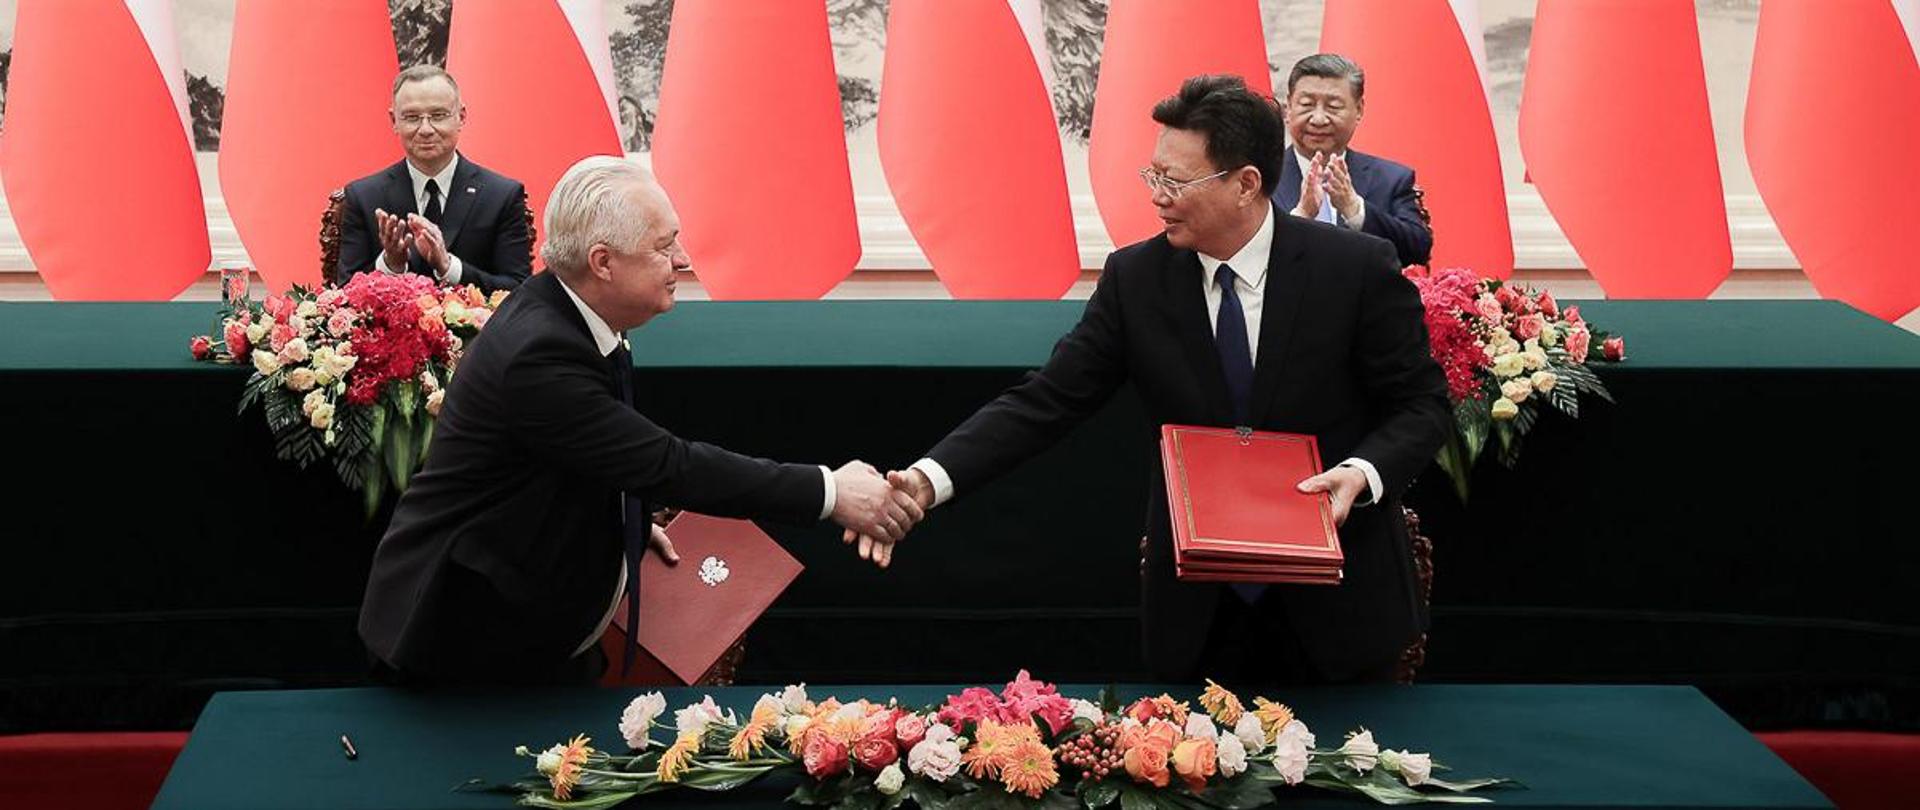 Deputy Minister Jacek Czerniak signs the memorandum and protocols on export with the Chinese party (photo by Marek Borawski, Chancellery of the Prime Minister)